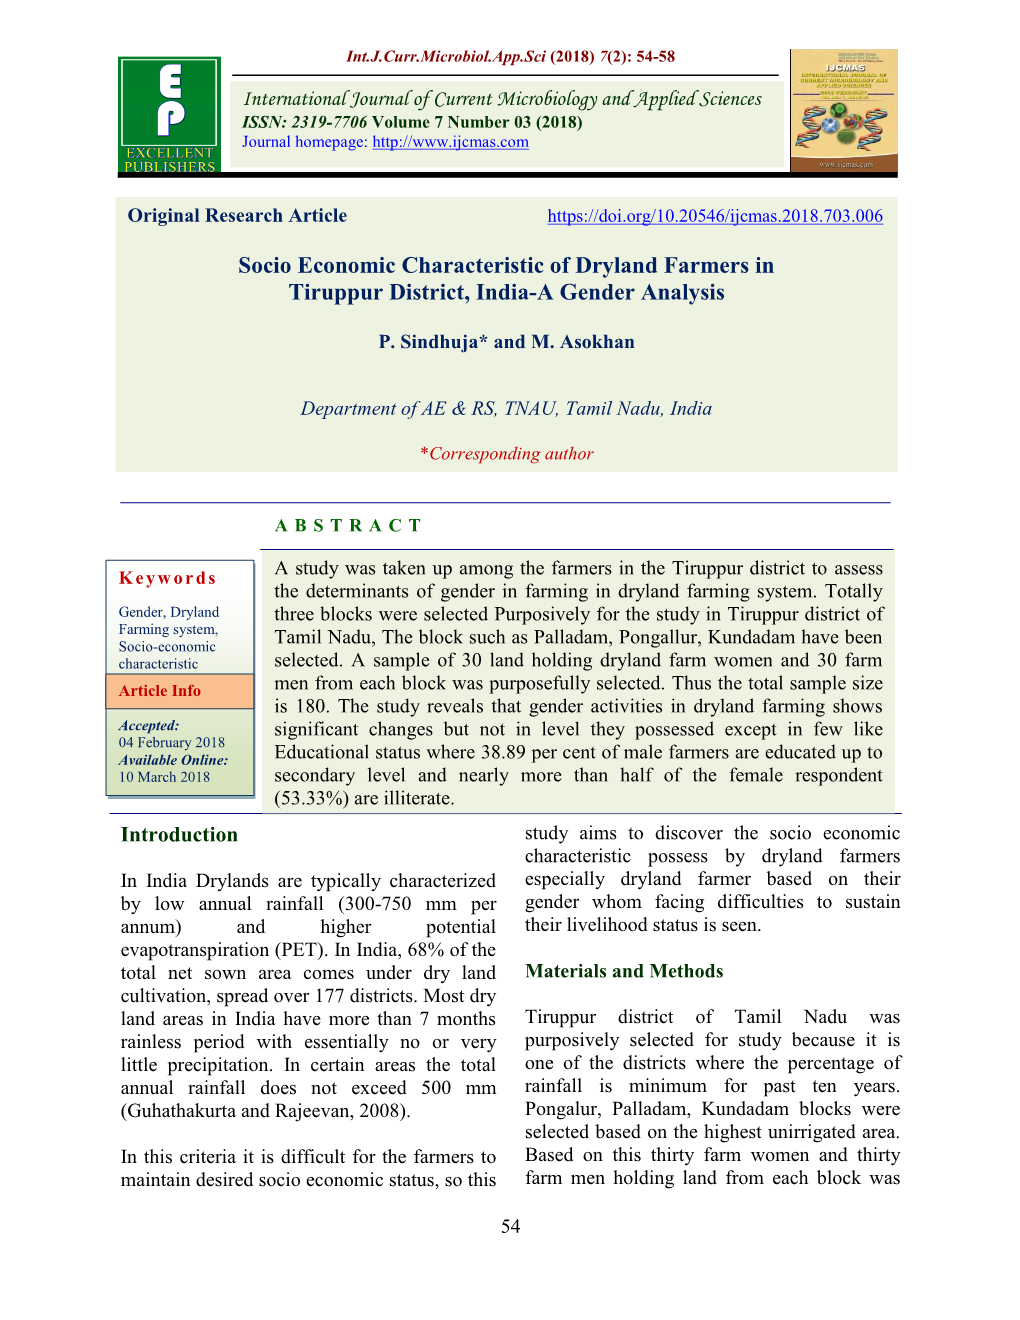 Socio Economic Characteristic of Dryland Farmers in Tiruppur District, India-A Gender Analysis